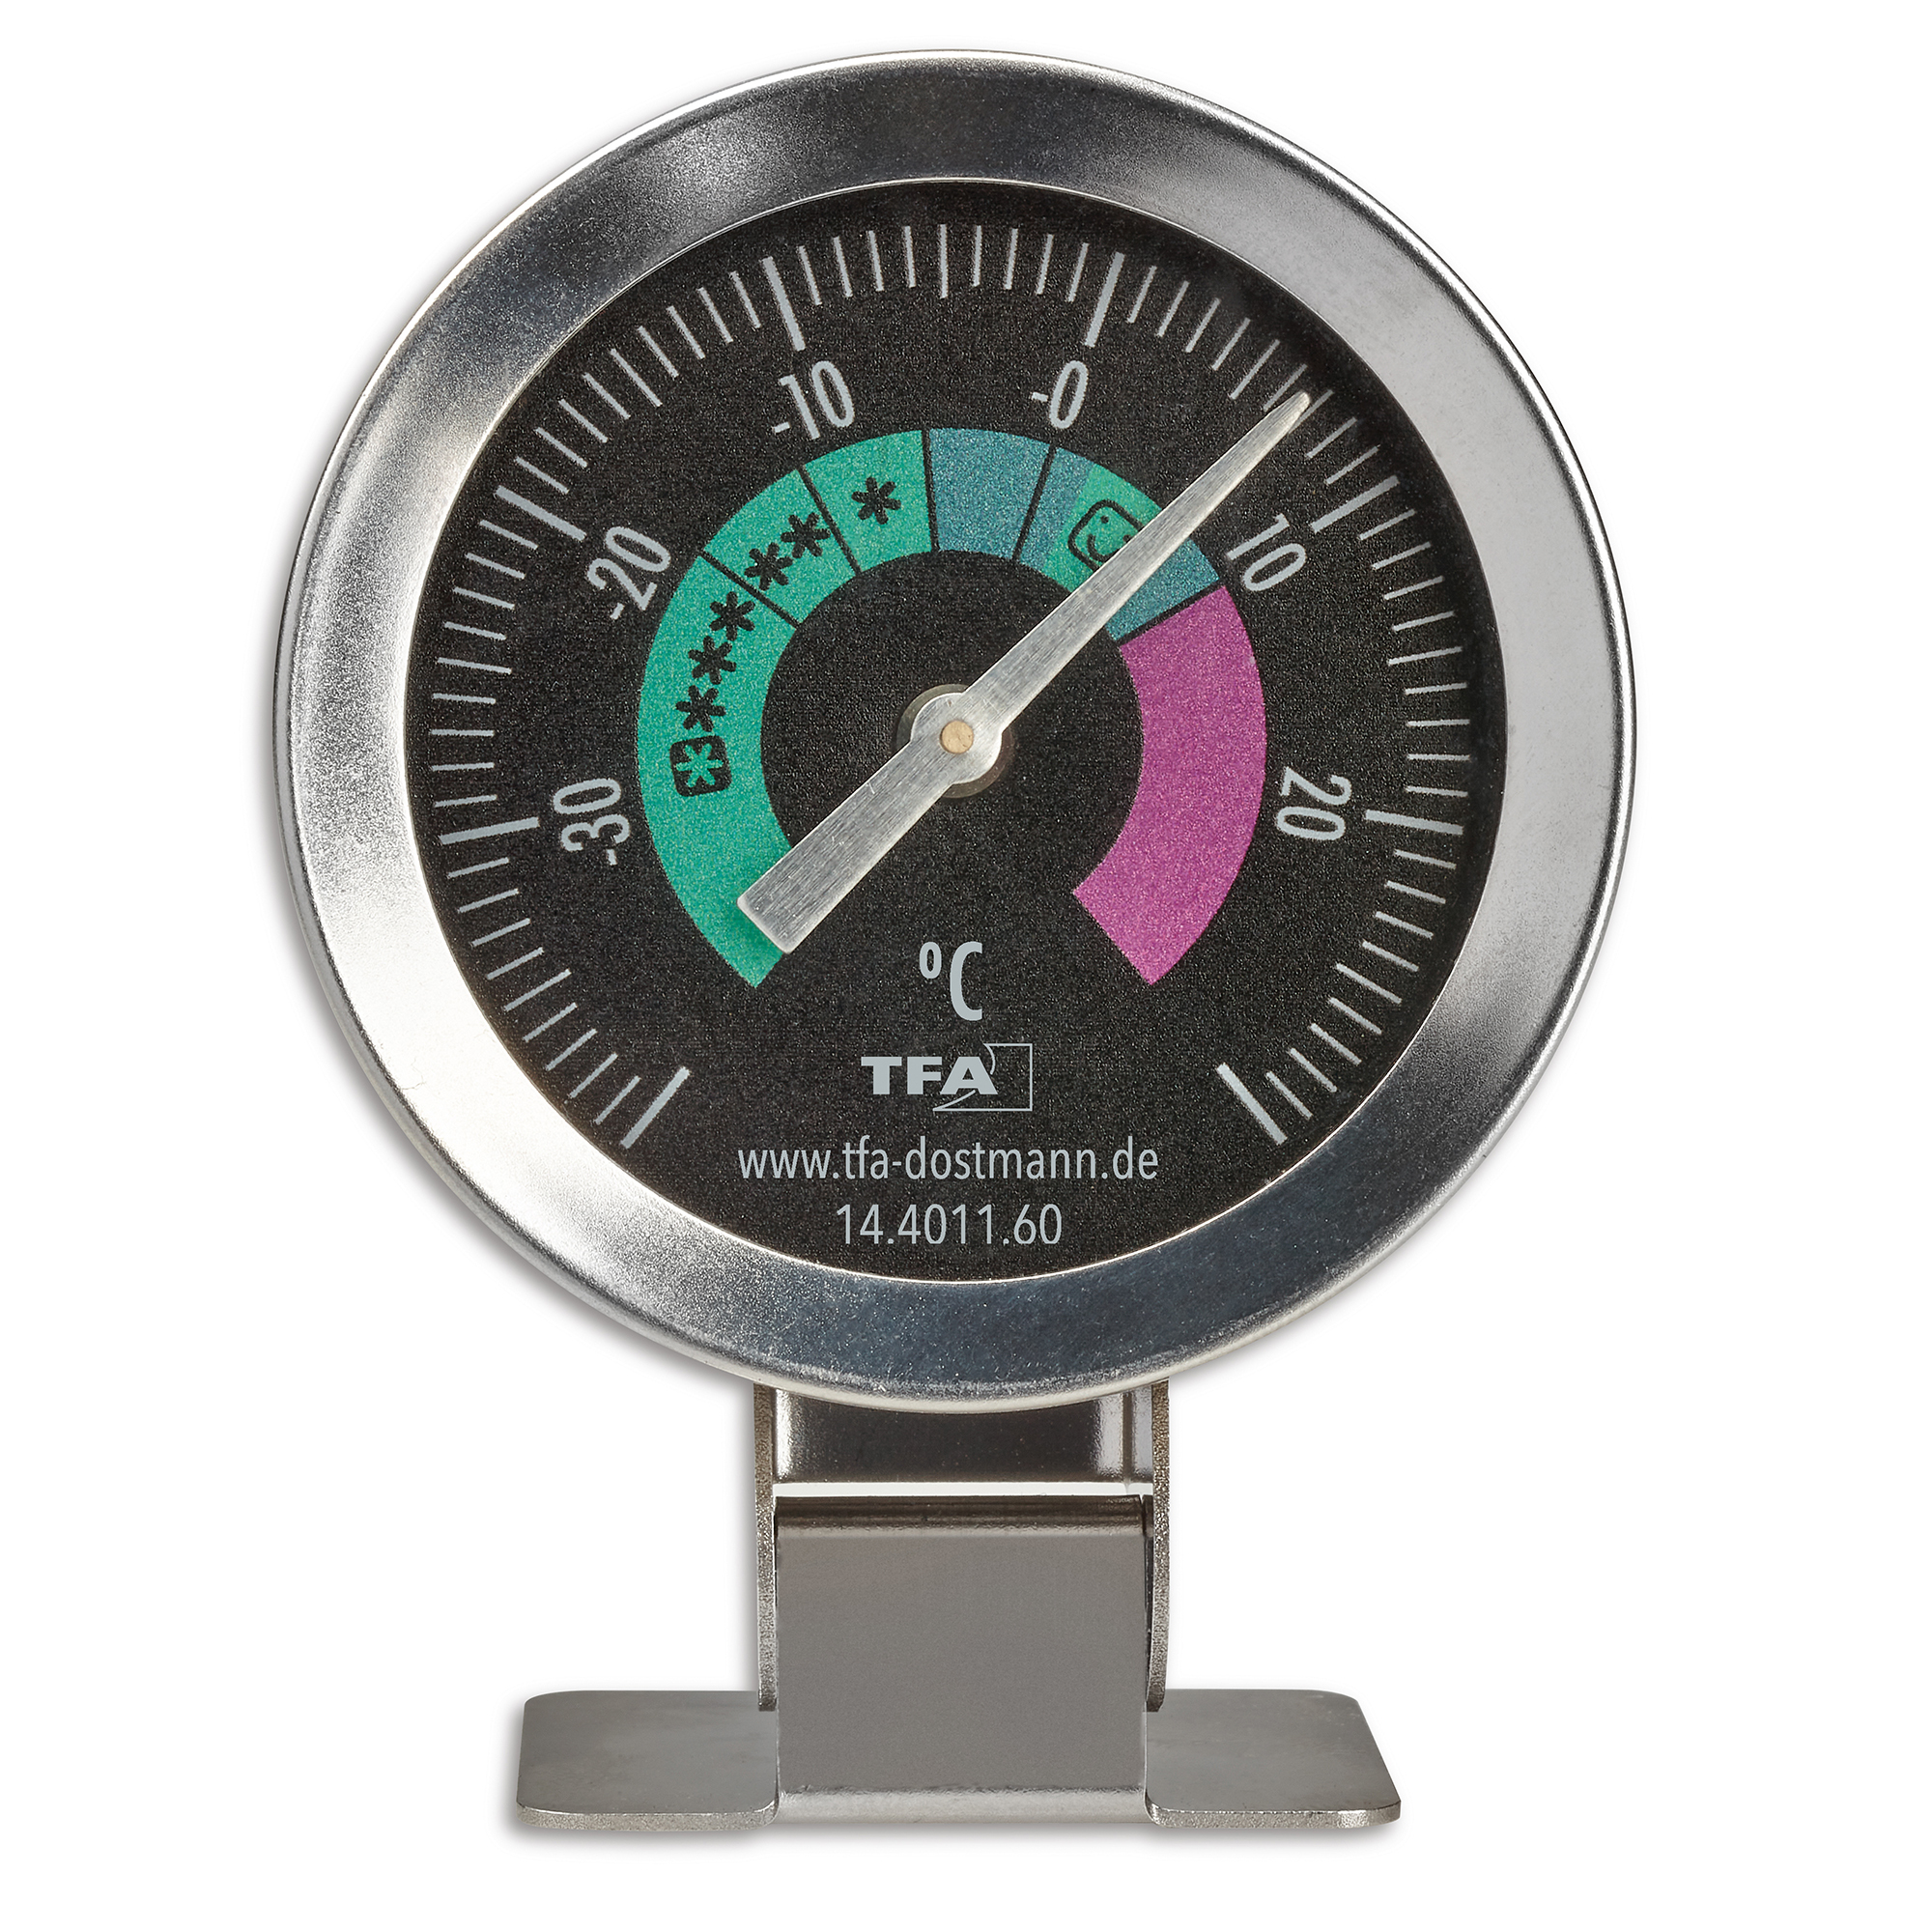 Practical analogue fridge and freezer thermometer